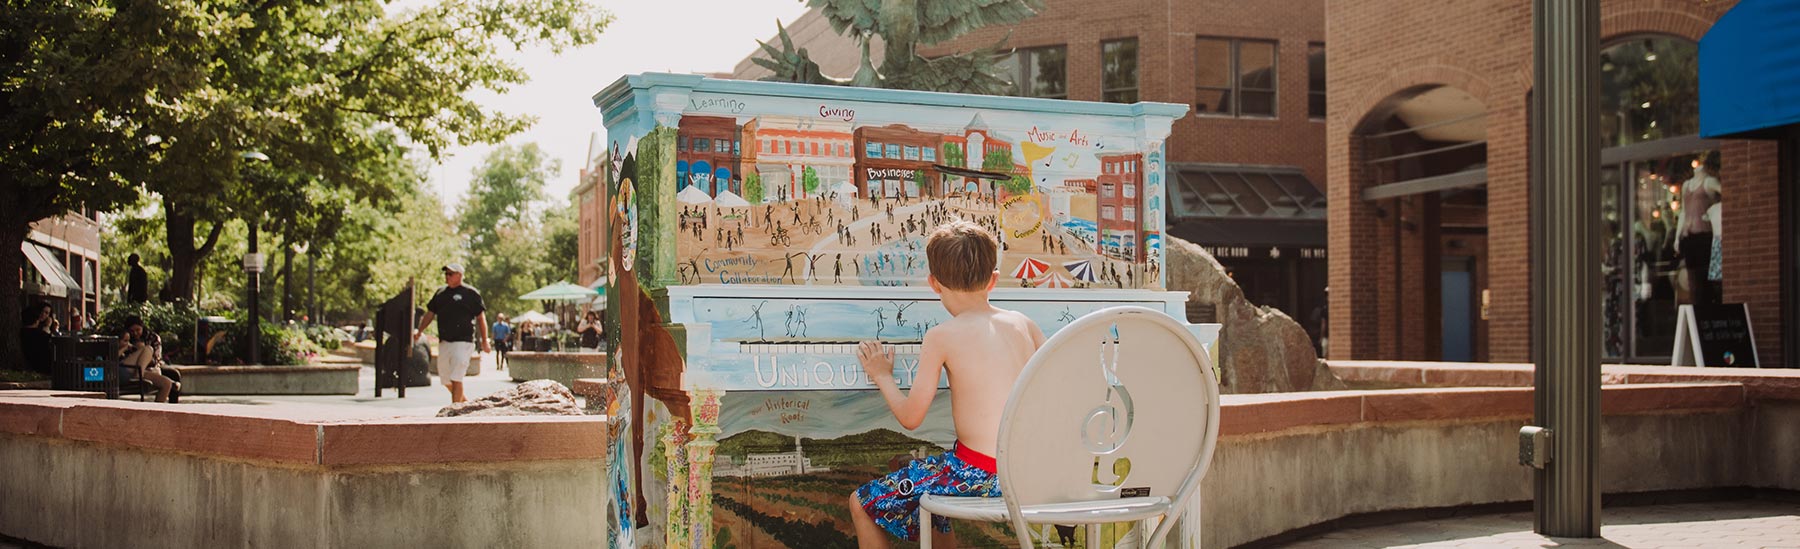 100th Piano - Pianos About Town